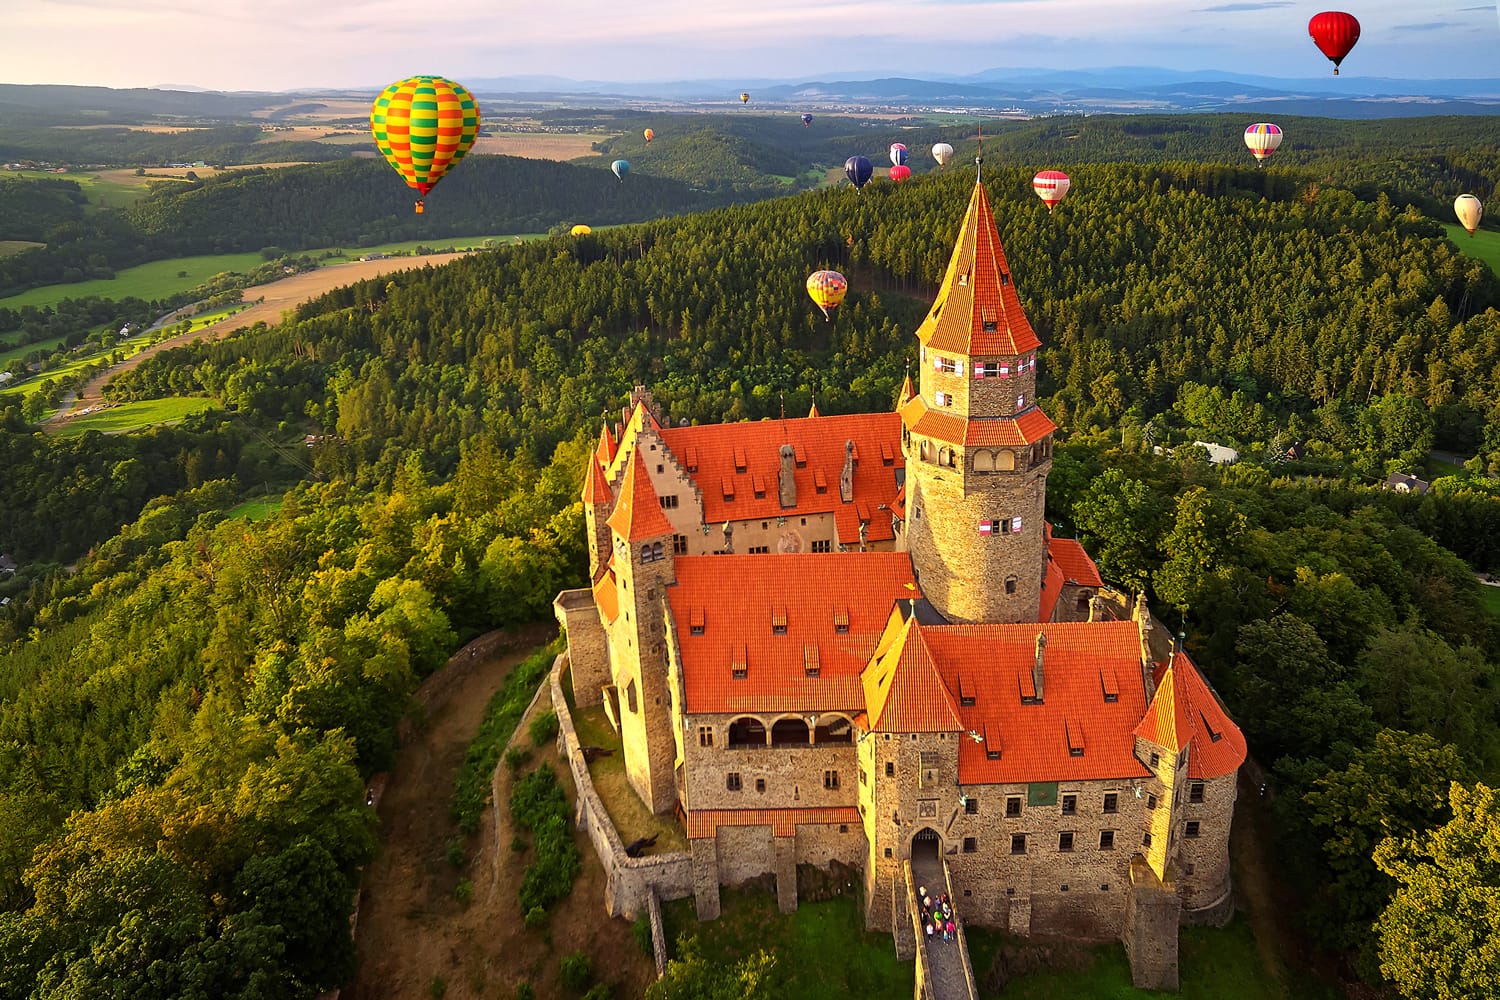 Aerial view on romantic fairy castle with group hot air balloons in picturesque landscape lit by evening sun. Moravia, Czech republic.